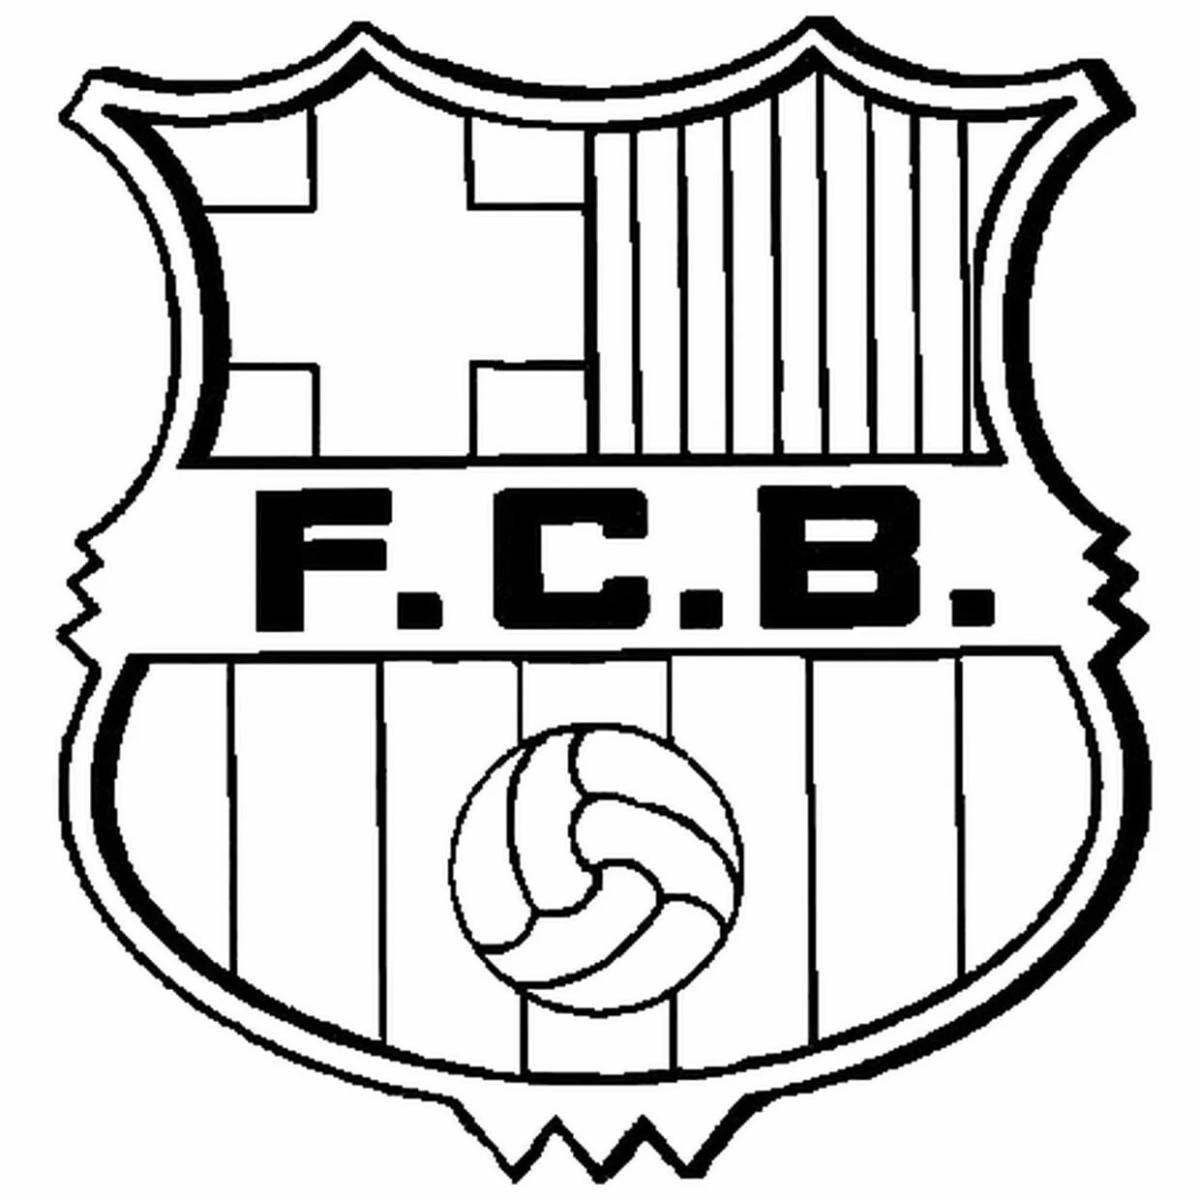 Coloring page dazzling barcelona logo